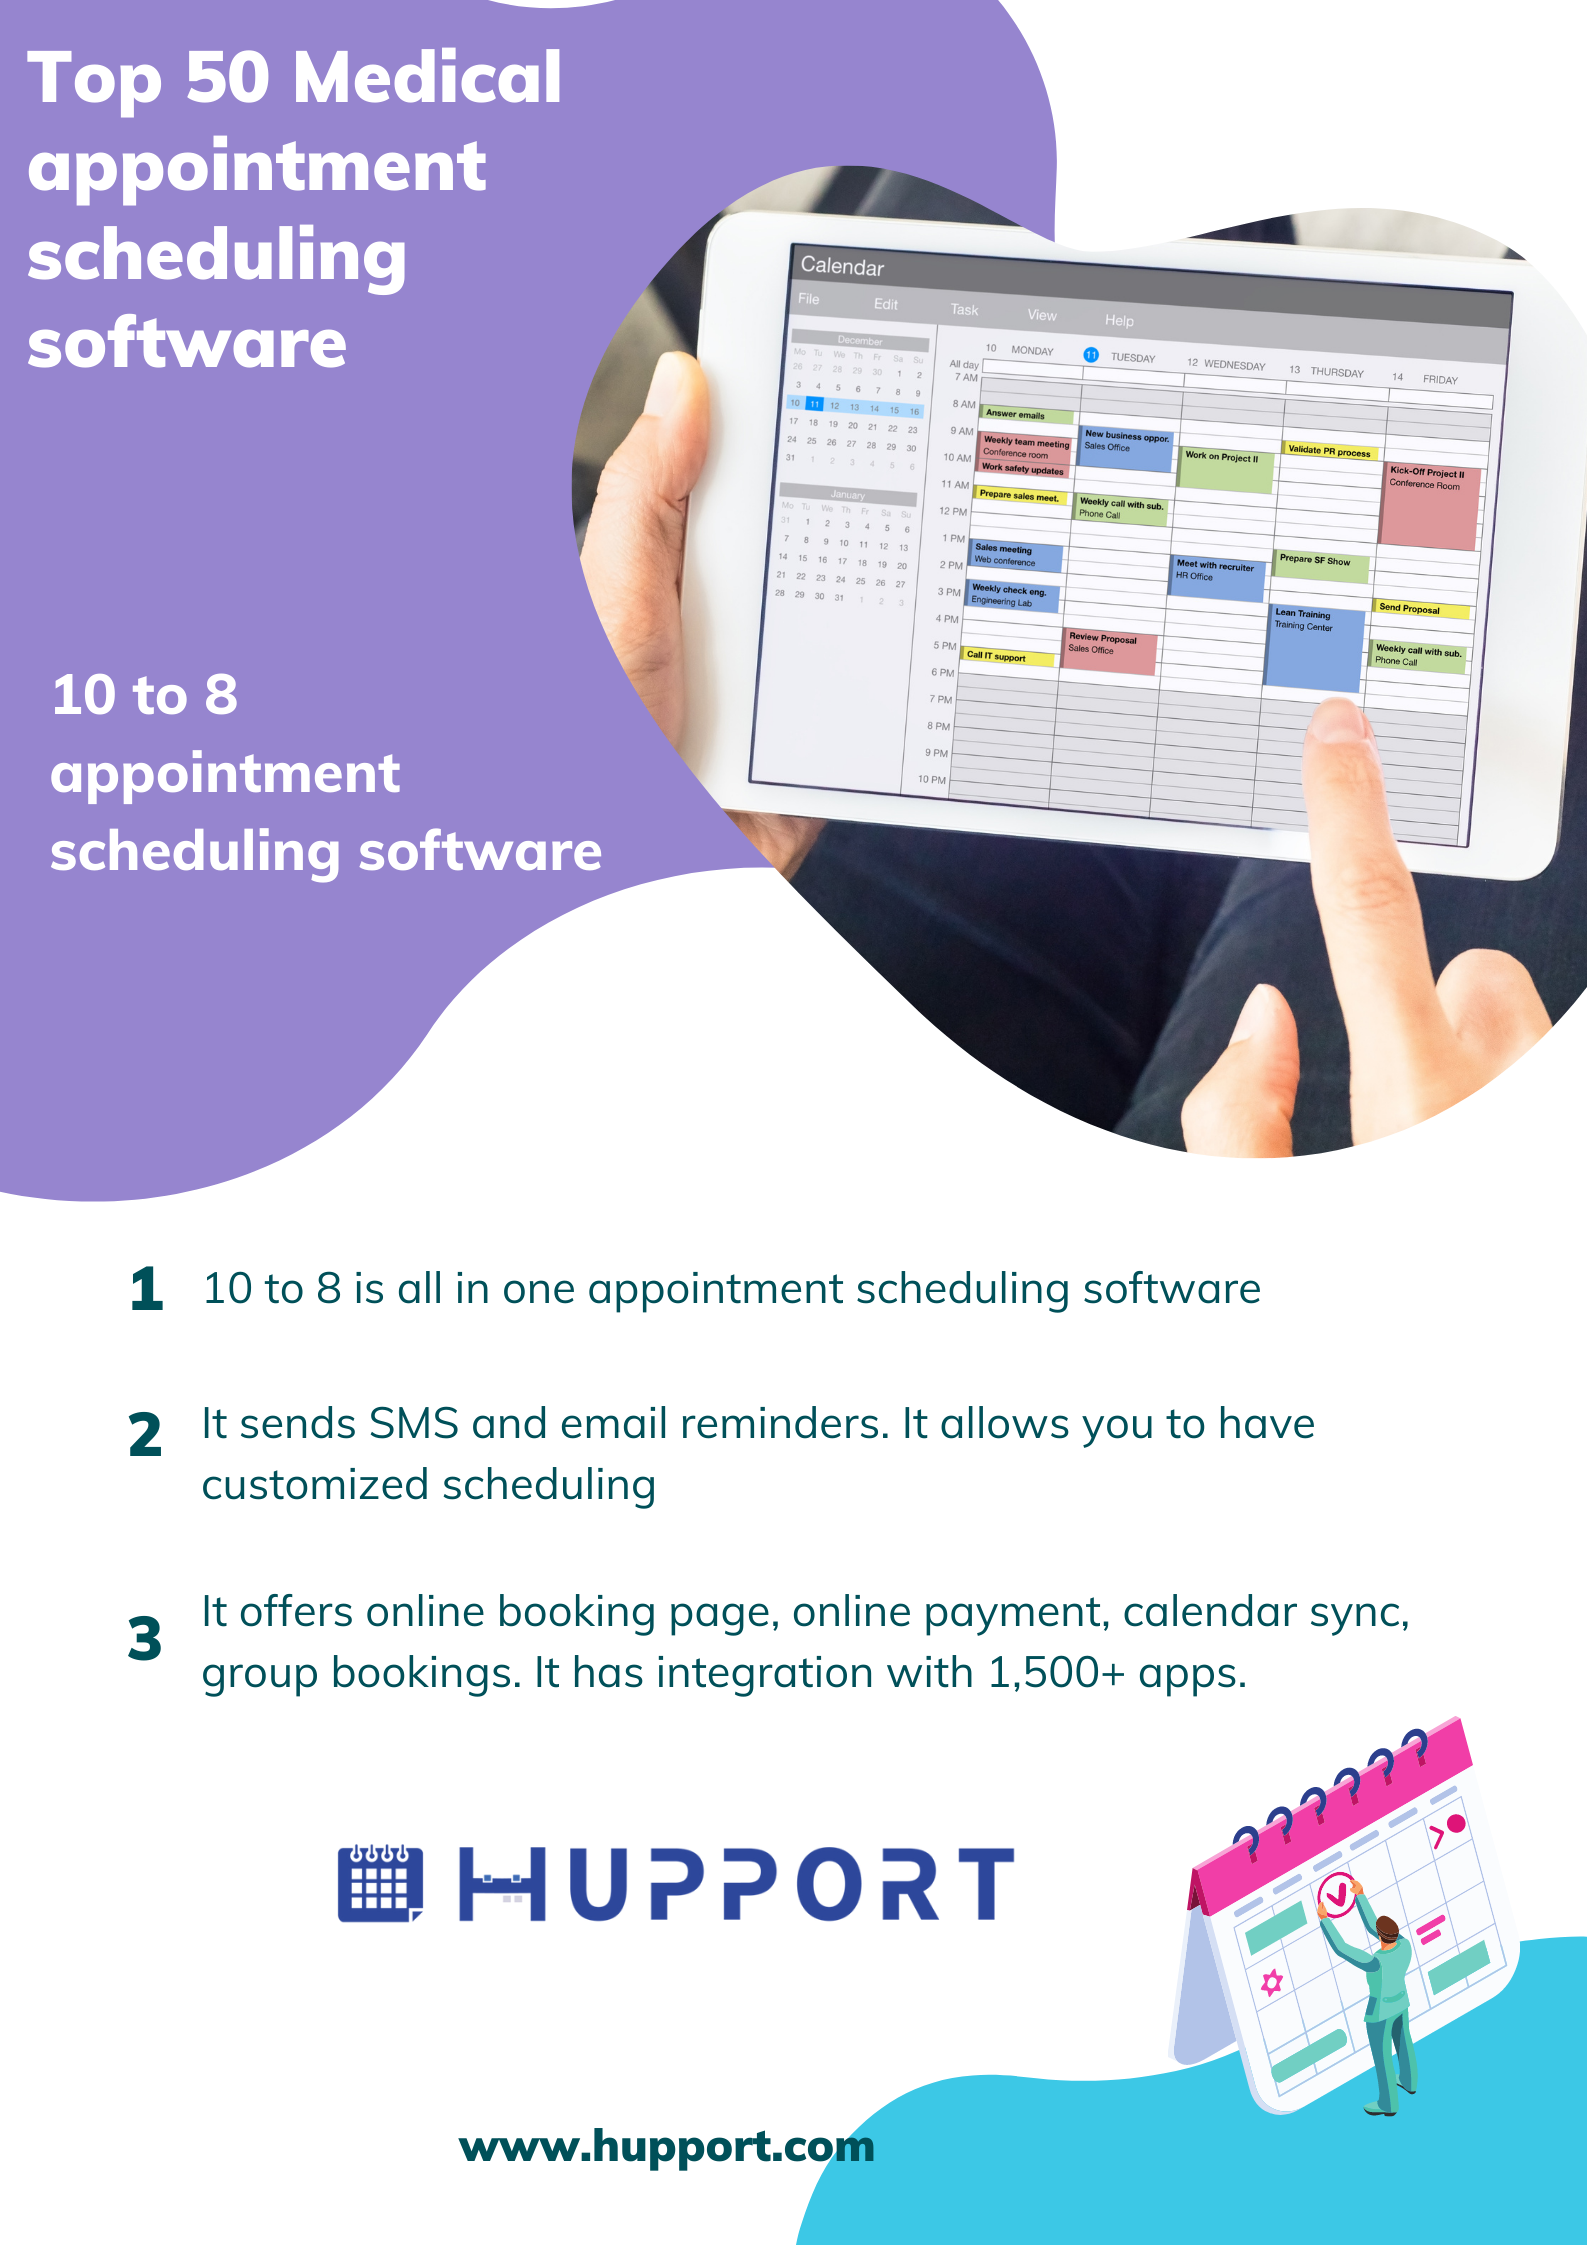 10 to 8 appointment scheduling software